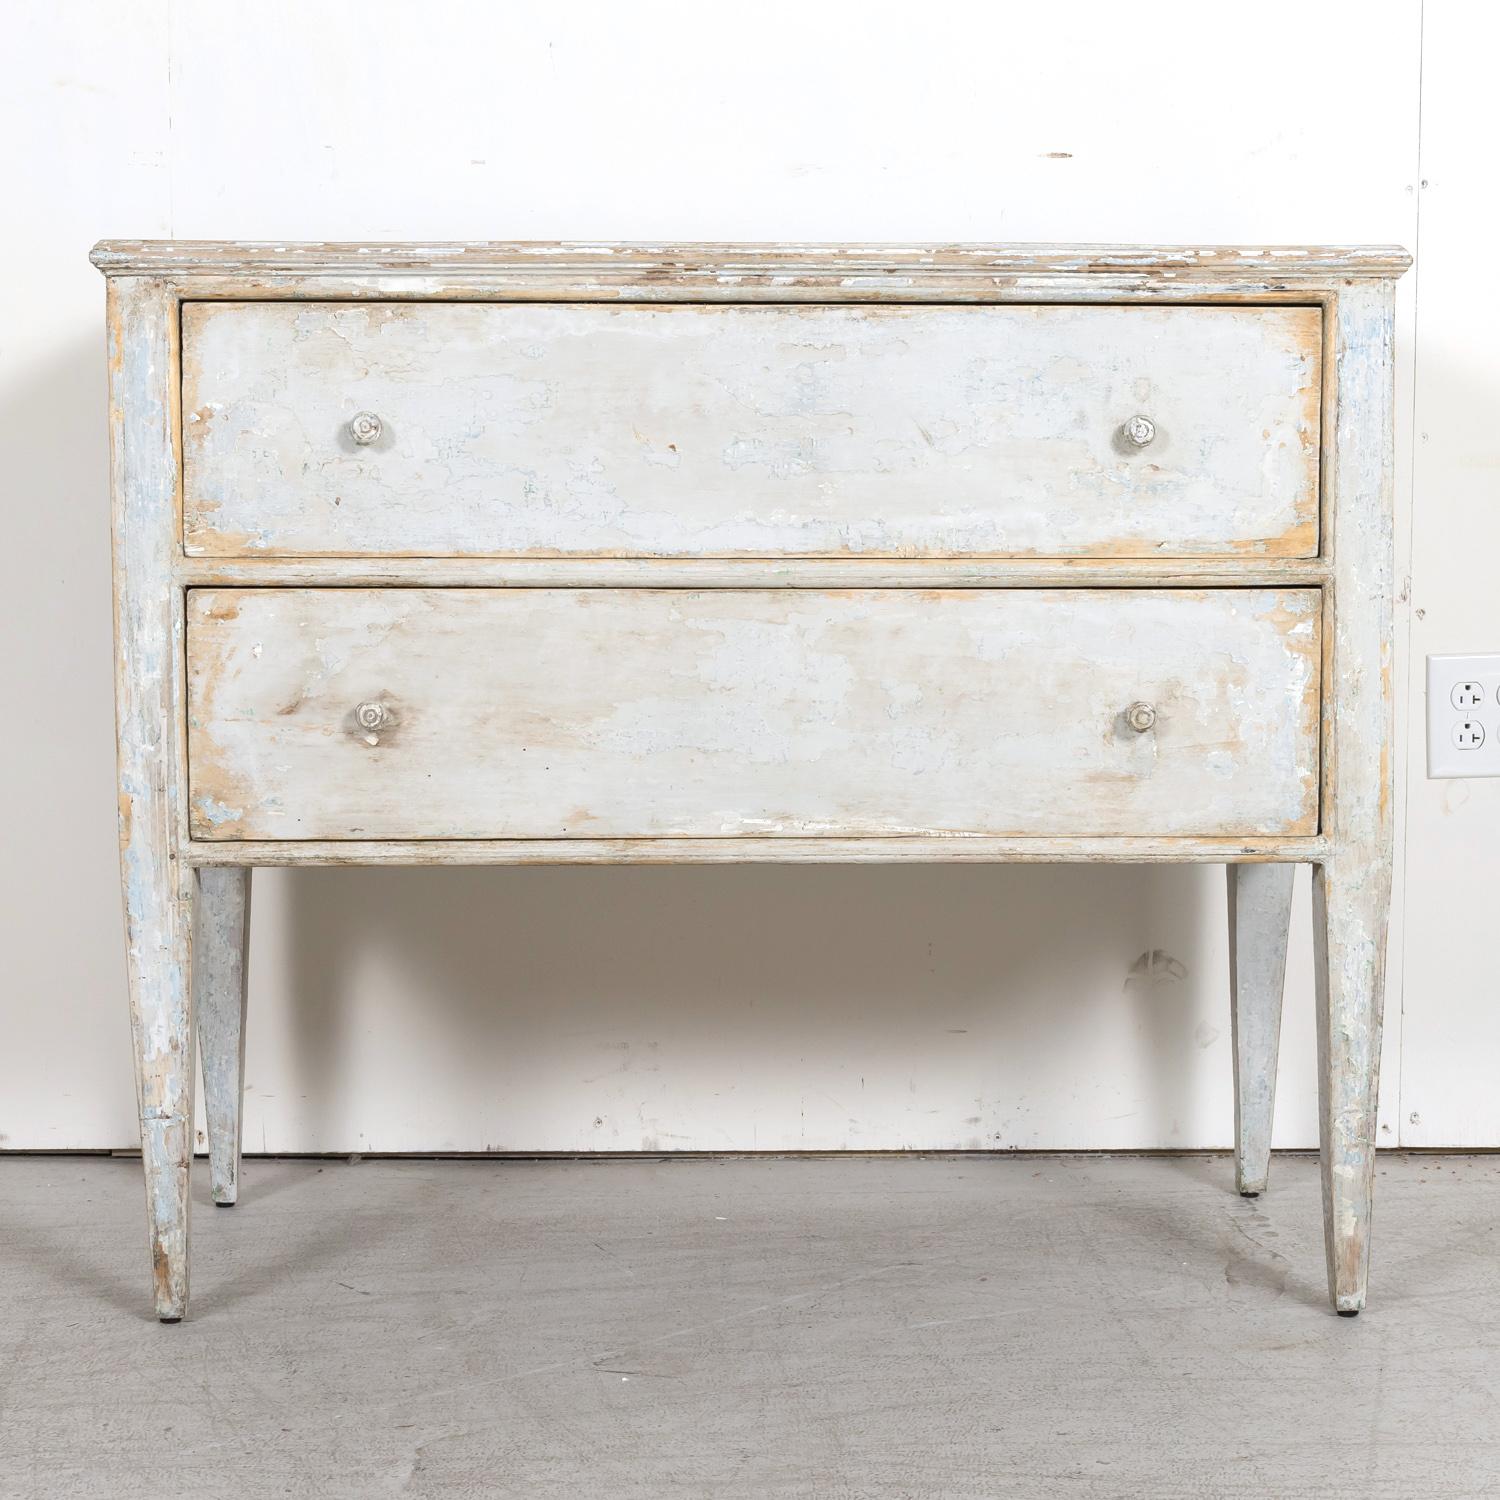 Late 19th Century 19th Century French Louis XVI Style Painted Commode Sauteuse